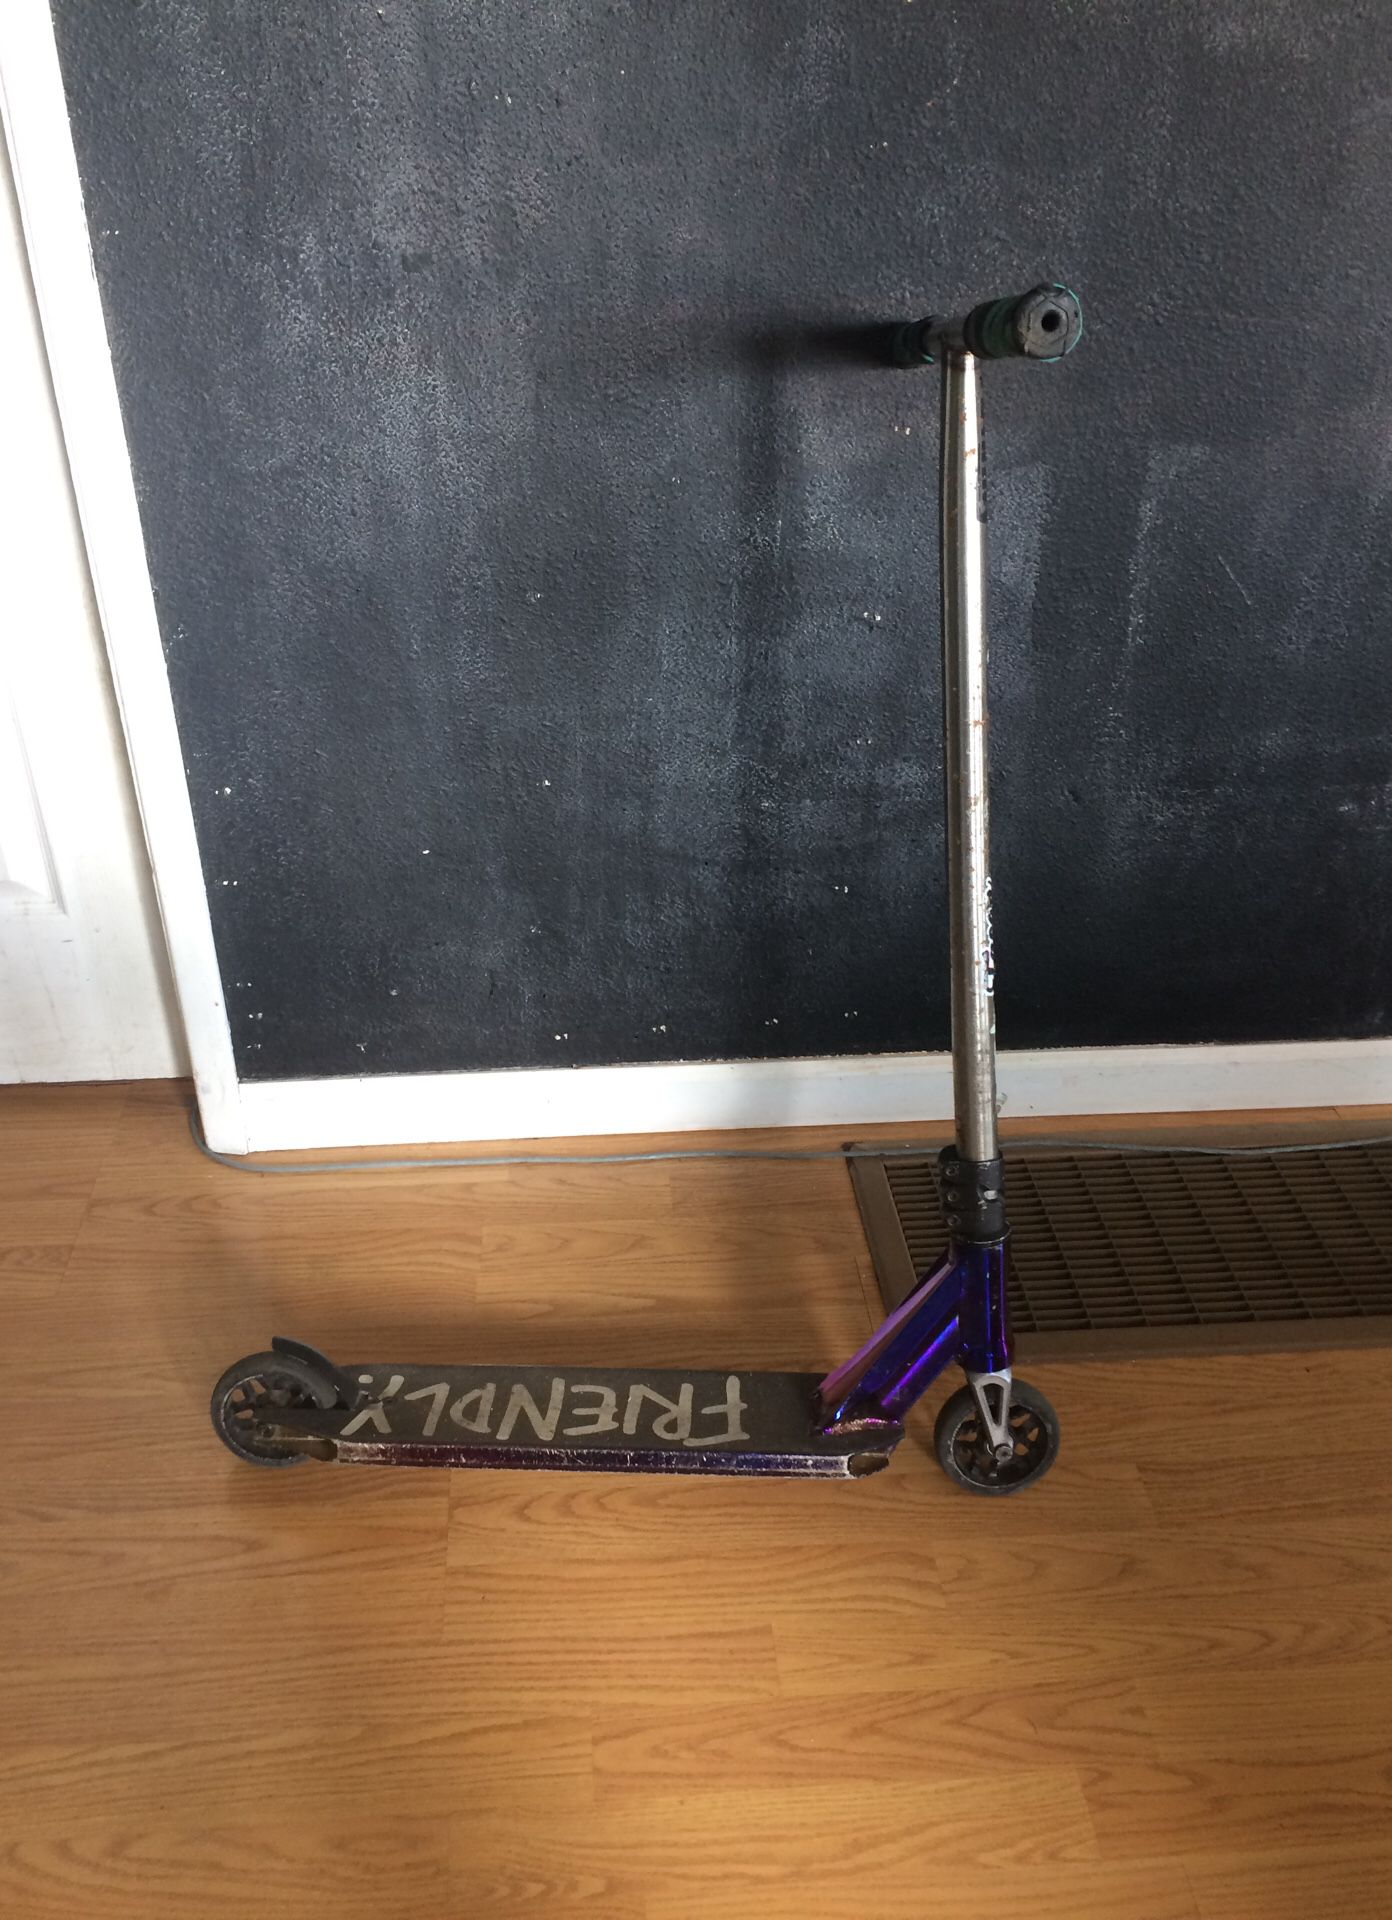 Pro scooter